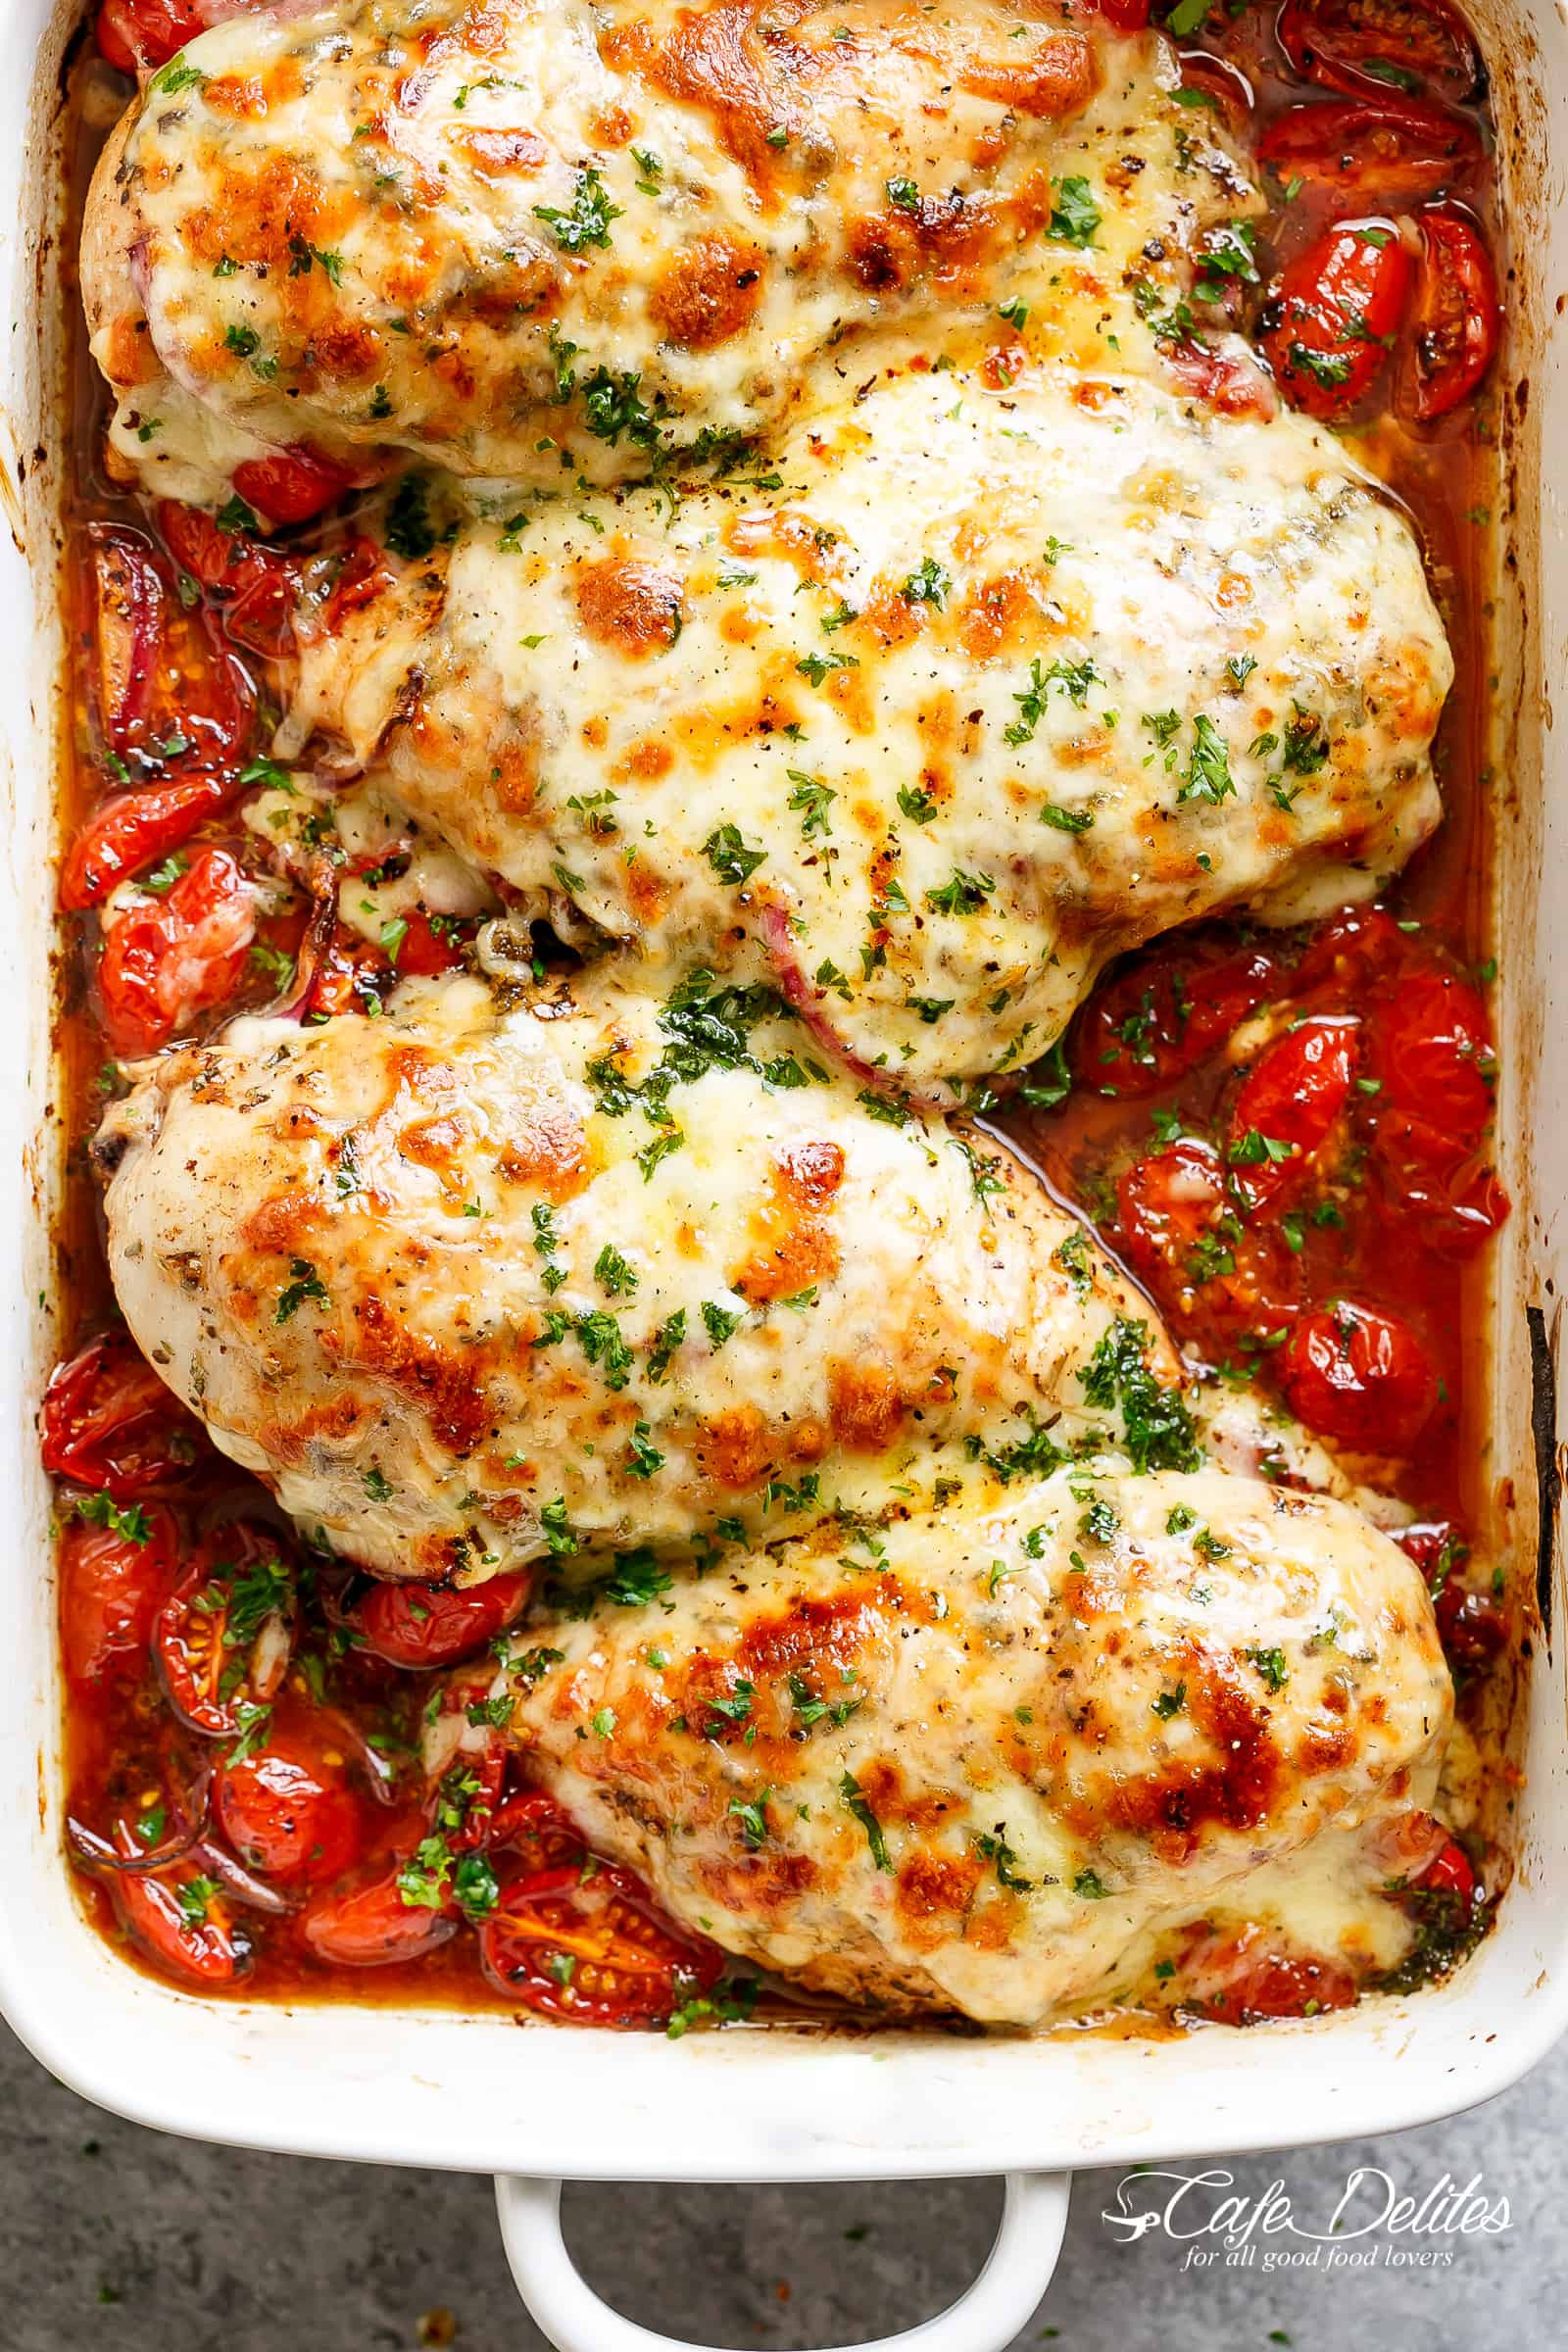 Baked Boneless Skinless Chicken Breast Recipes
 Balsamic Baked Chicken Breast With Mozzarella Cheese